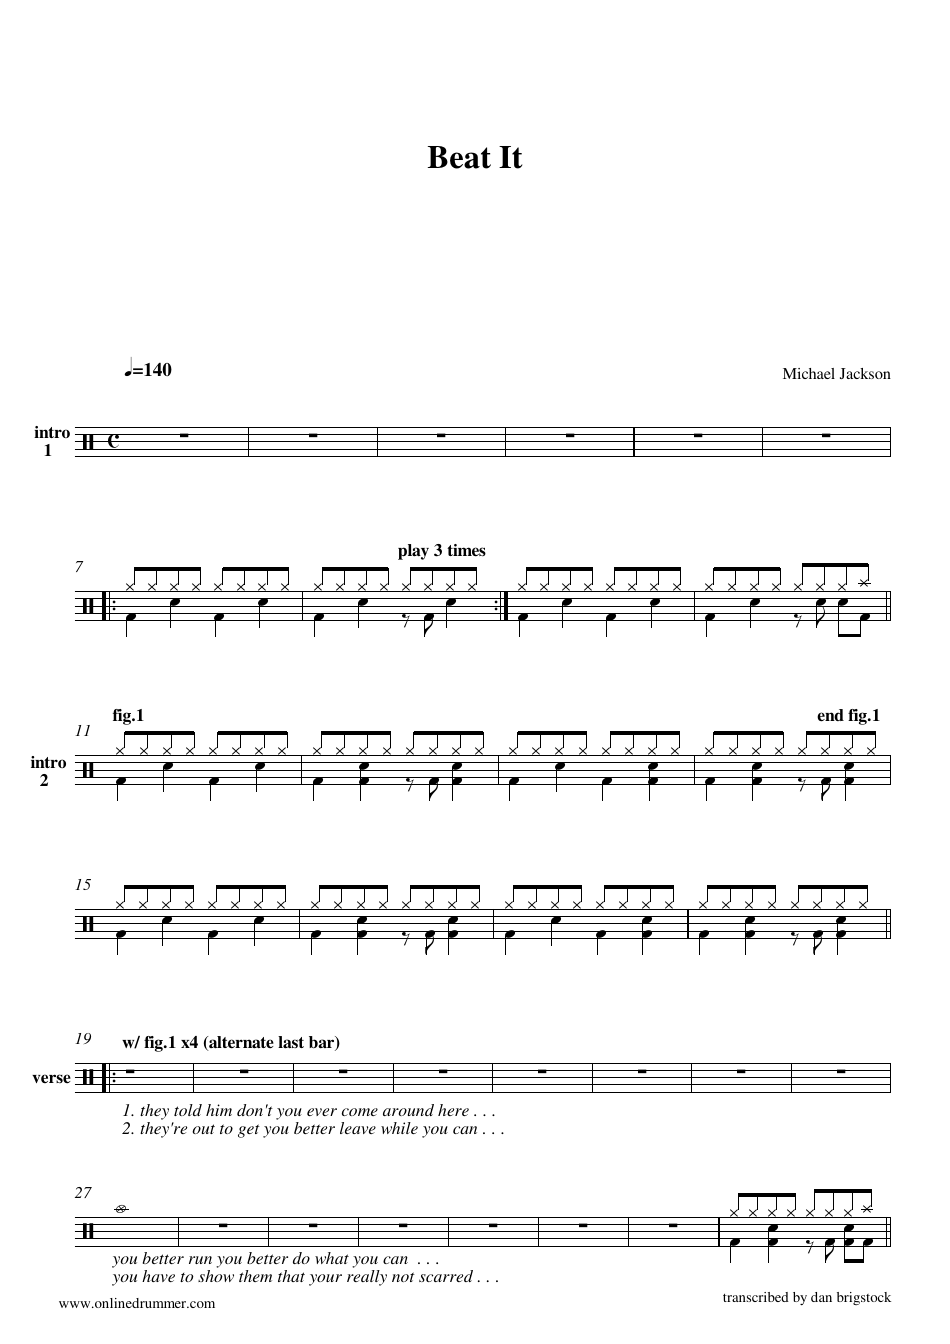 Beat It Drum Sheet Music by Michael Jackson Title and Cover Image